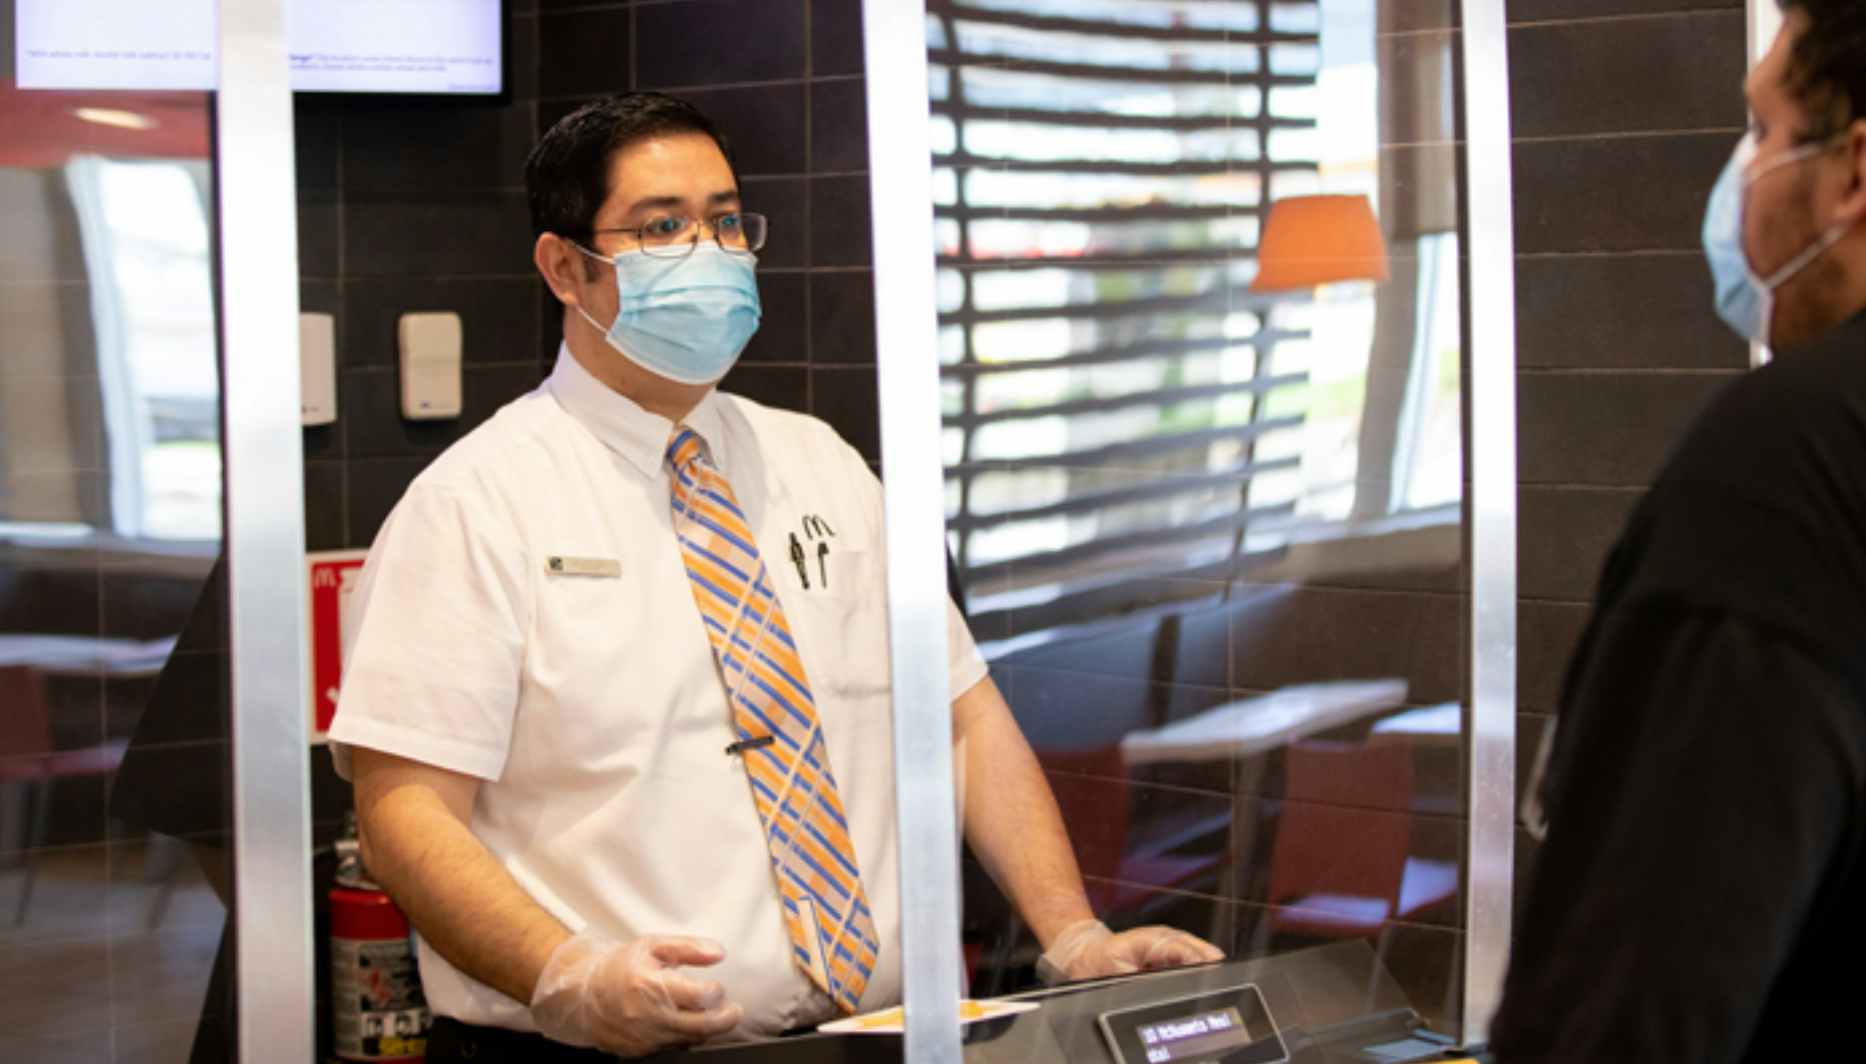 Restaurant worker at the register wearing a face mask